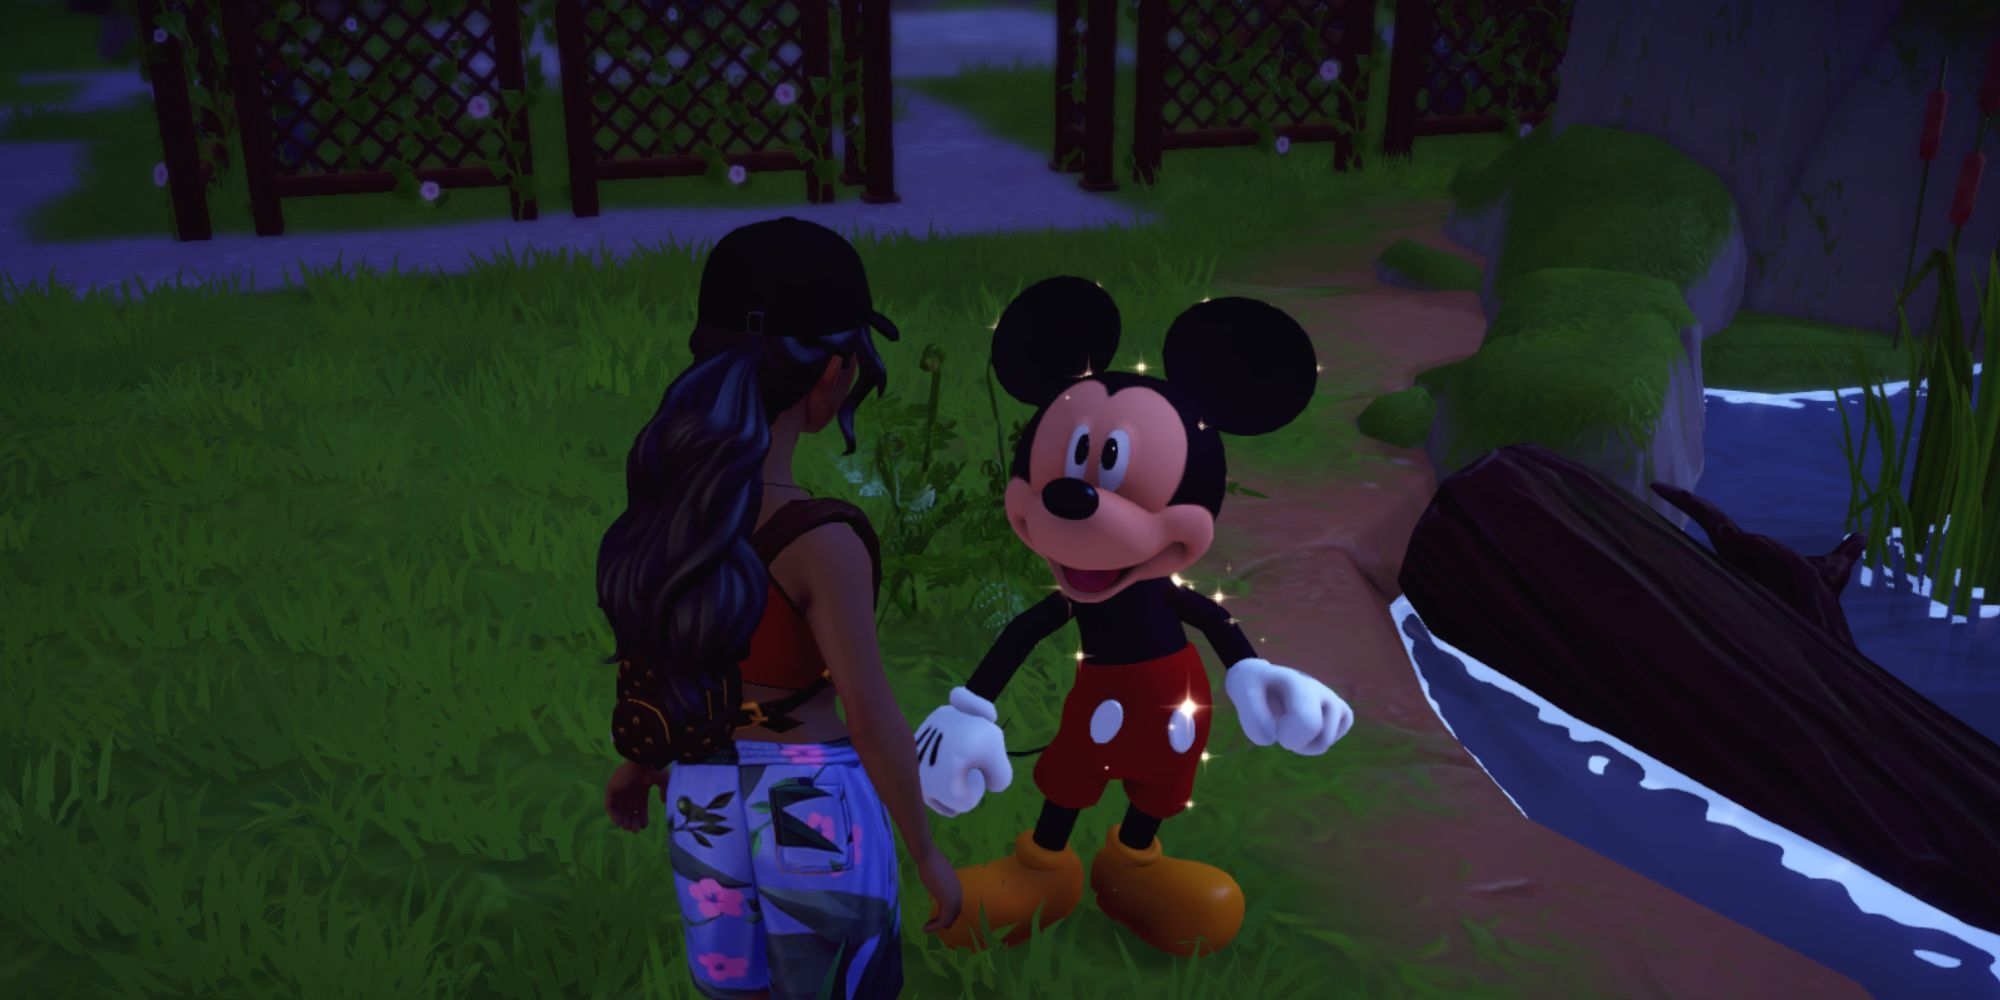 Disney Dreamlight Valley. Protagonist speaking to Mickey Mouse.